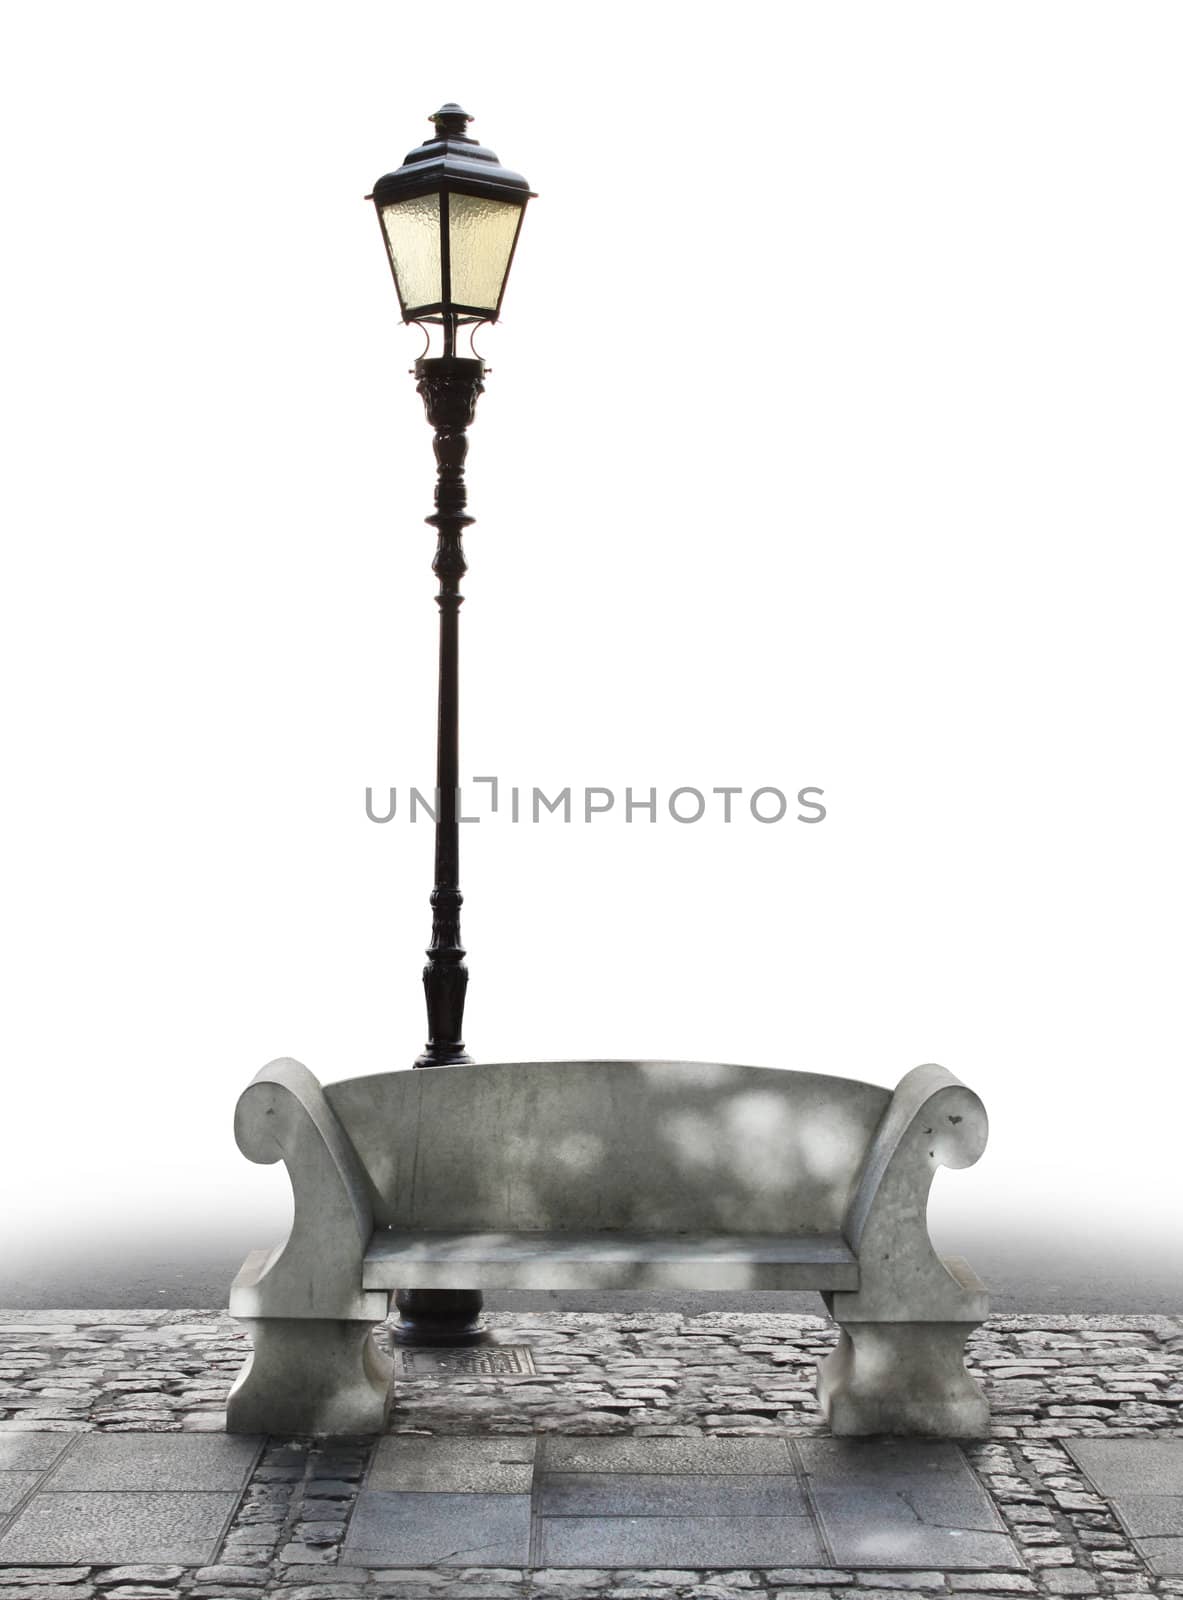 Marble bench seat and streetlight on stone paving, partly isolated